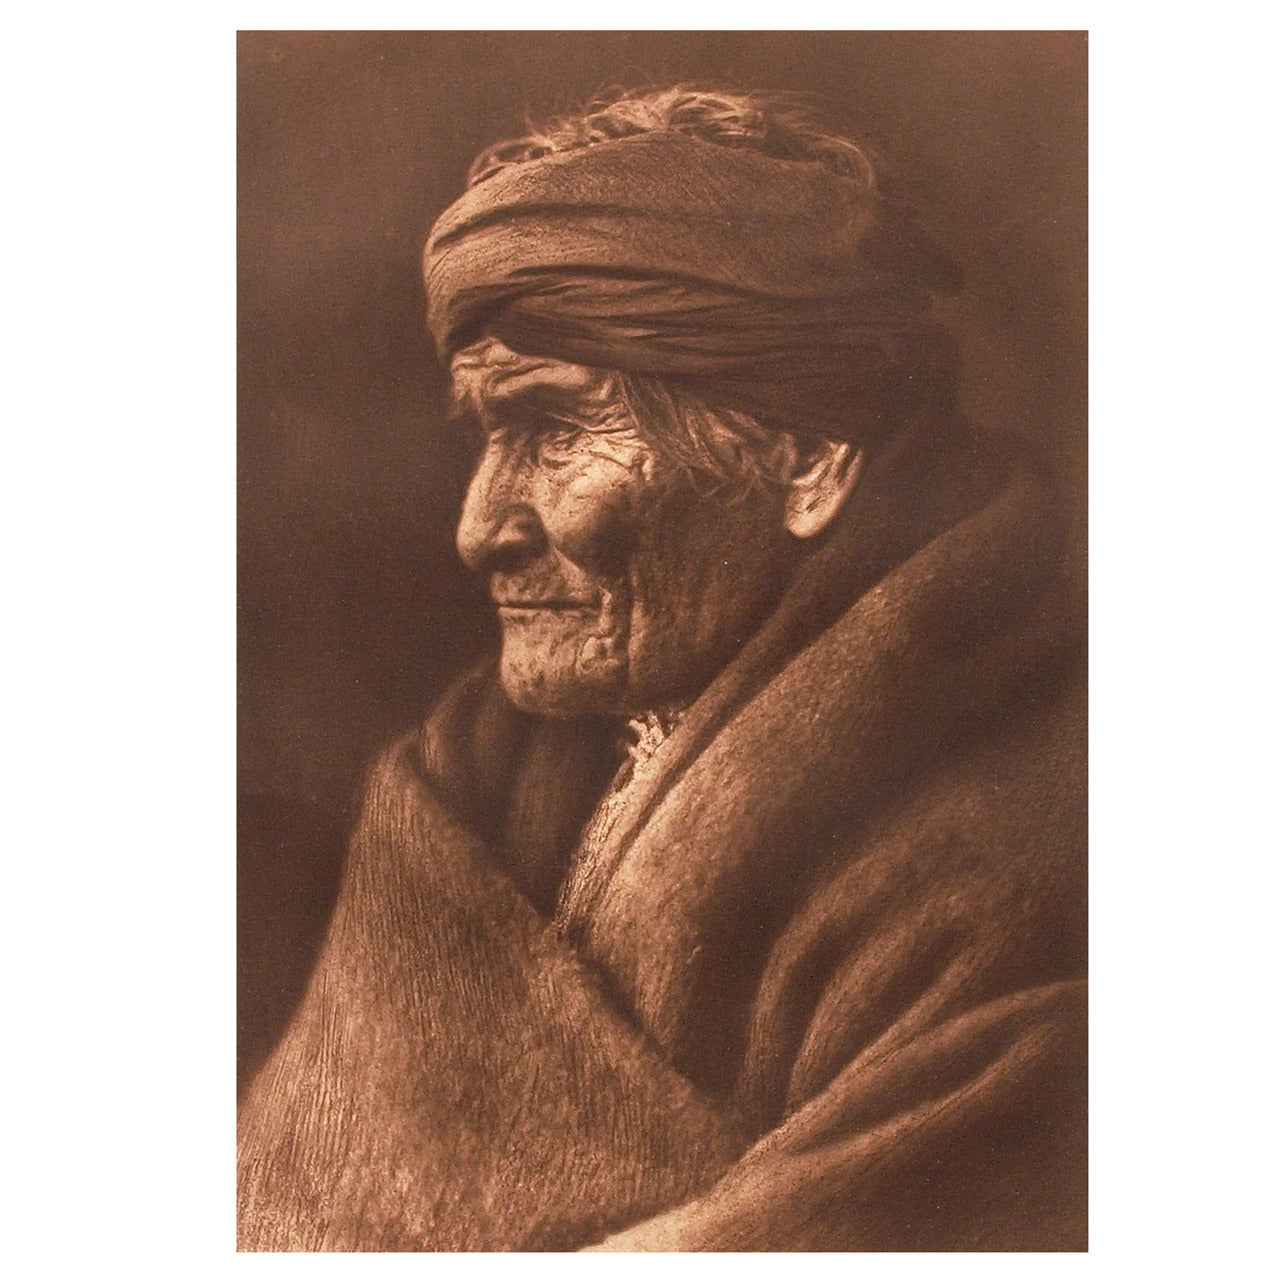 Early 20th Century Image of Geronimo by Edward S. Curtis